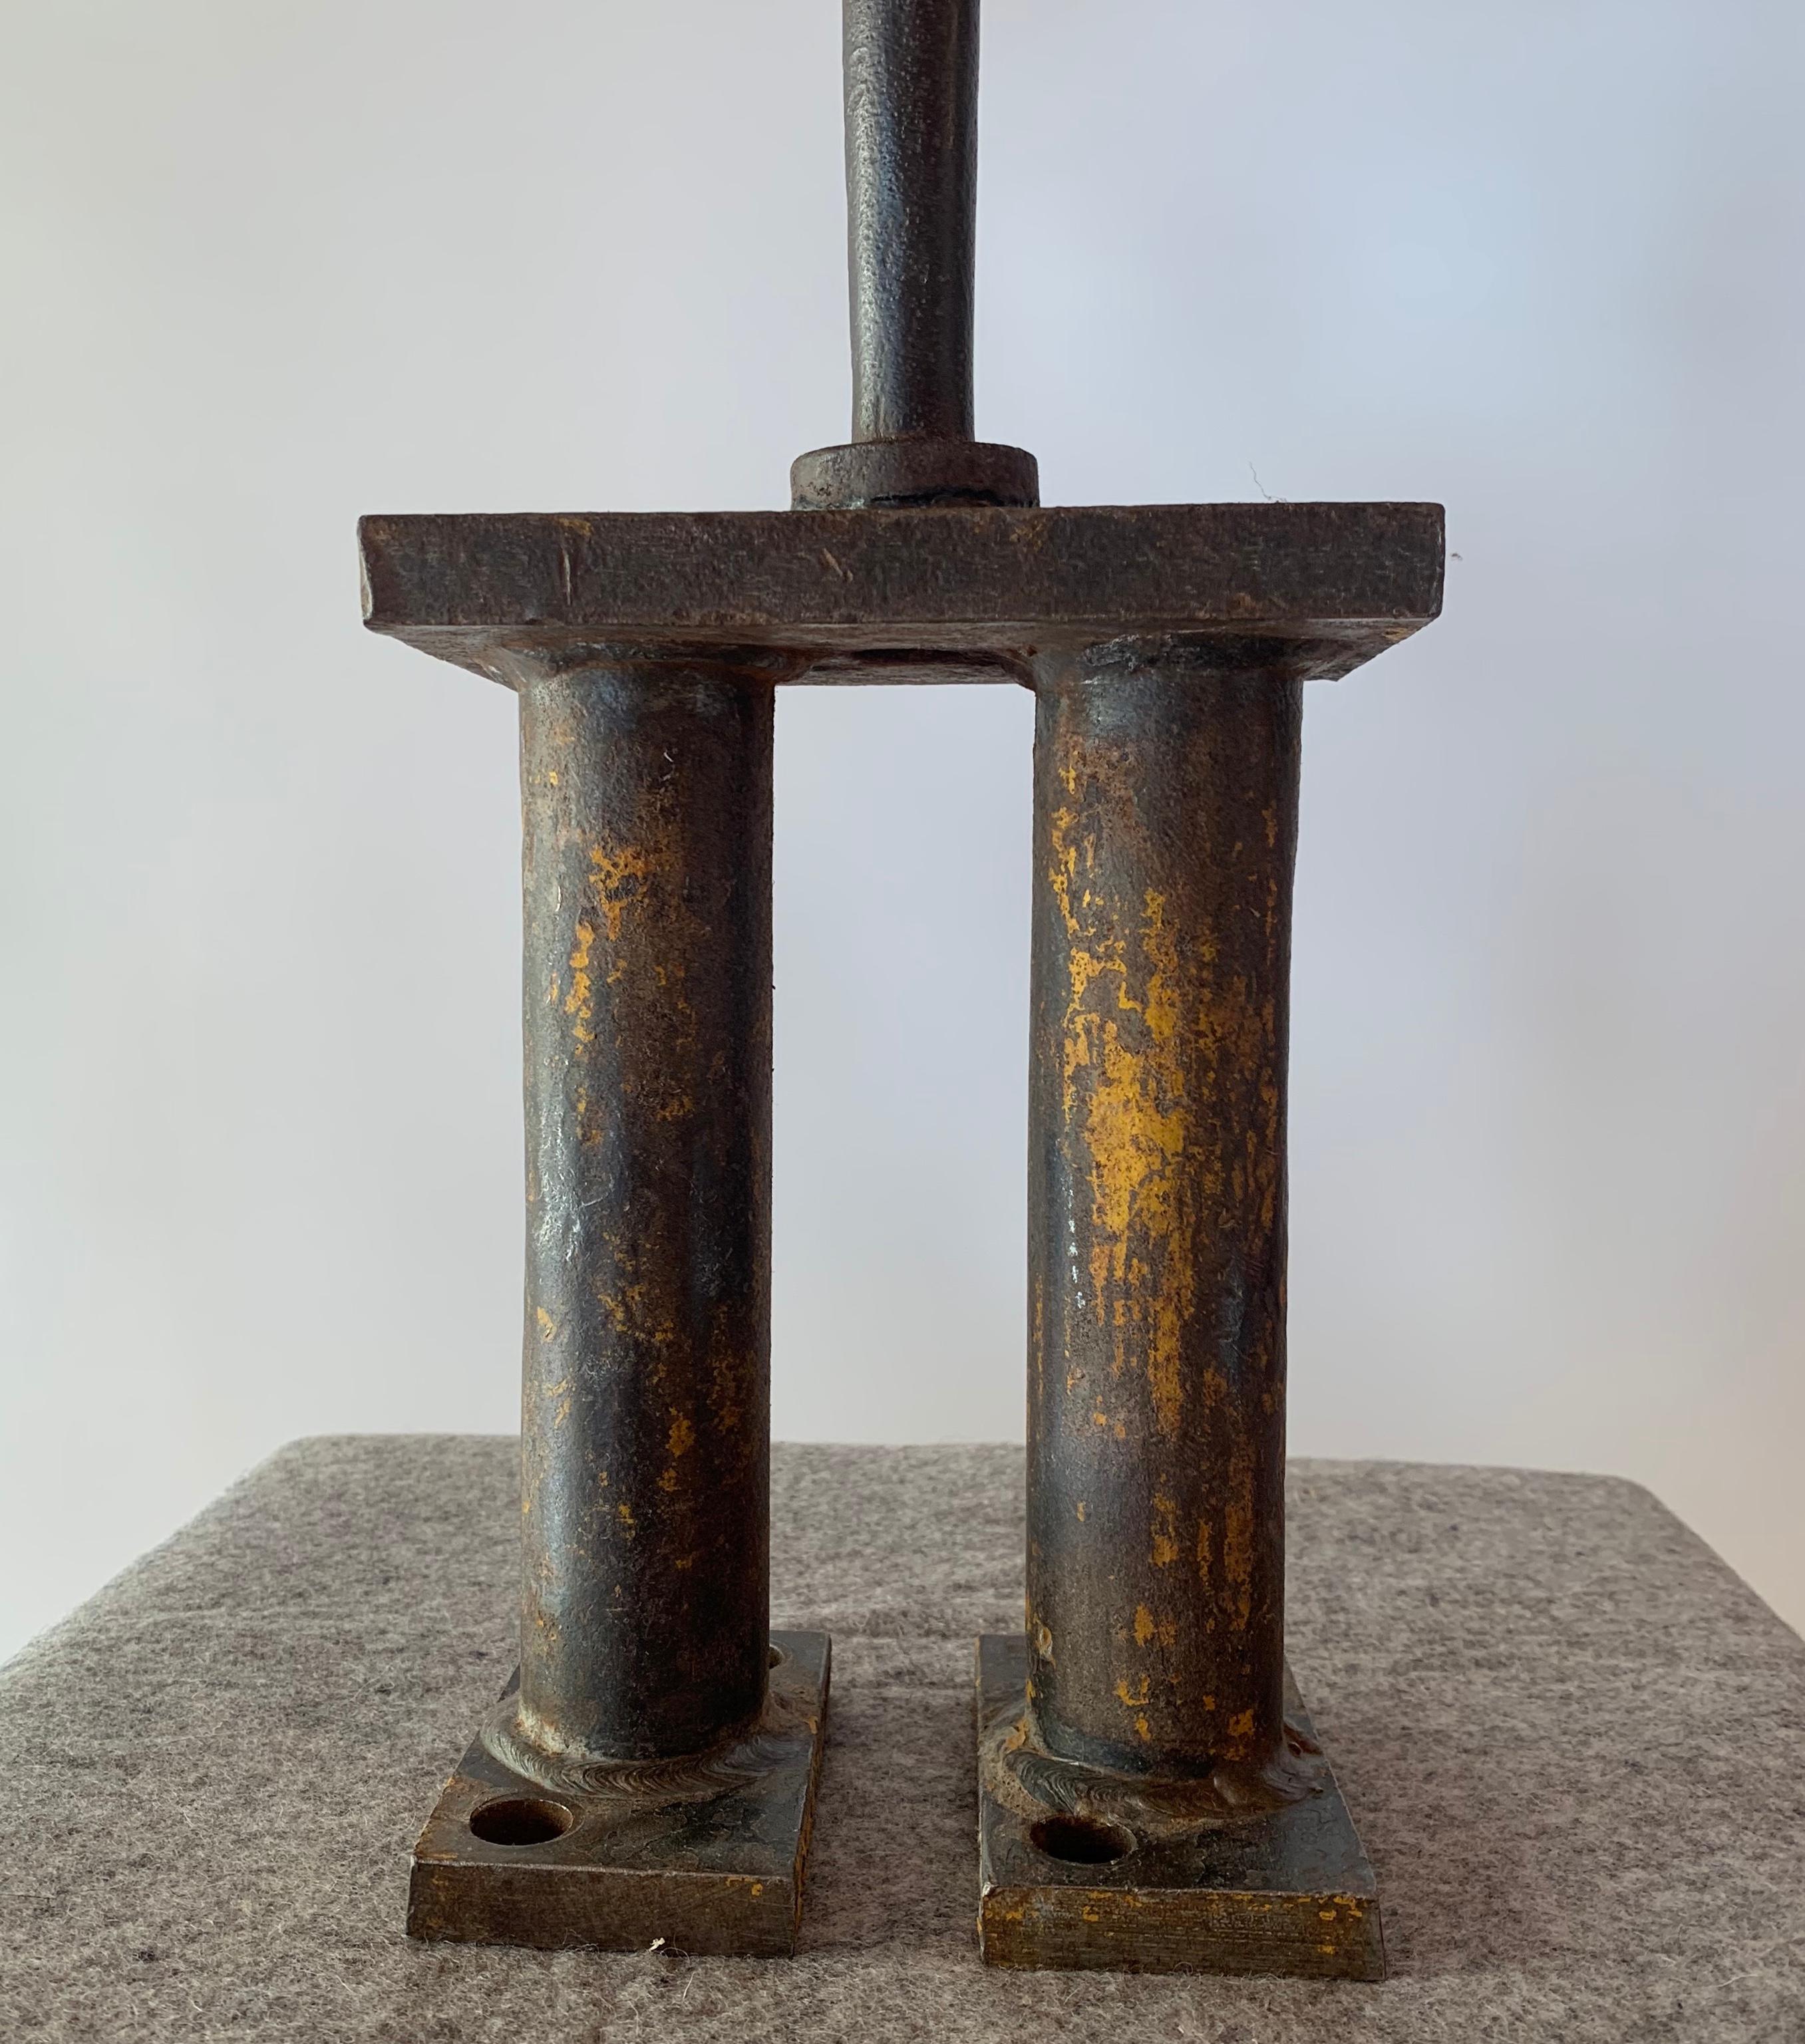 Monument
welded steel
4 X 16 X 20-1/2 in.

Artist statement:

I seldom use stock material, but prefer distressed and rusted steel that has been scarred, bent, and made imperfect. In this state, the material becomes quite beautiful. There are